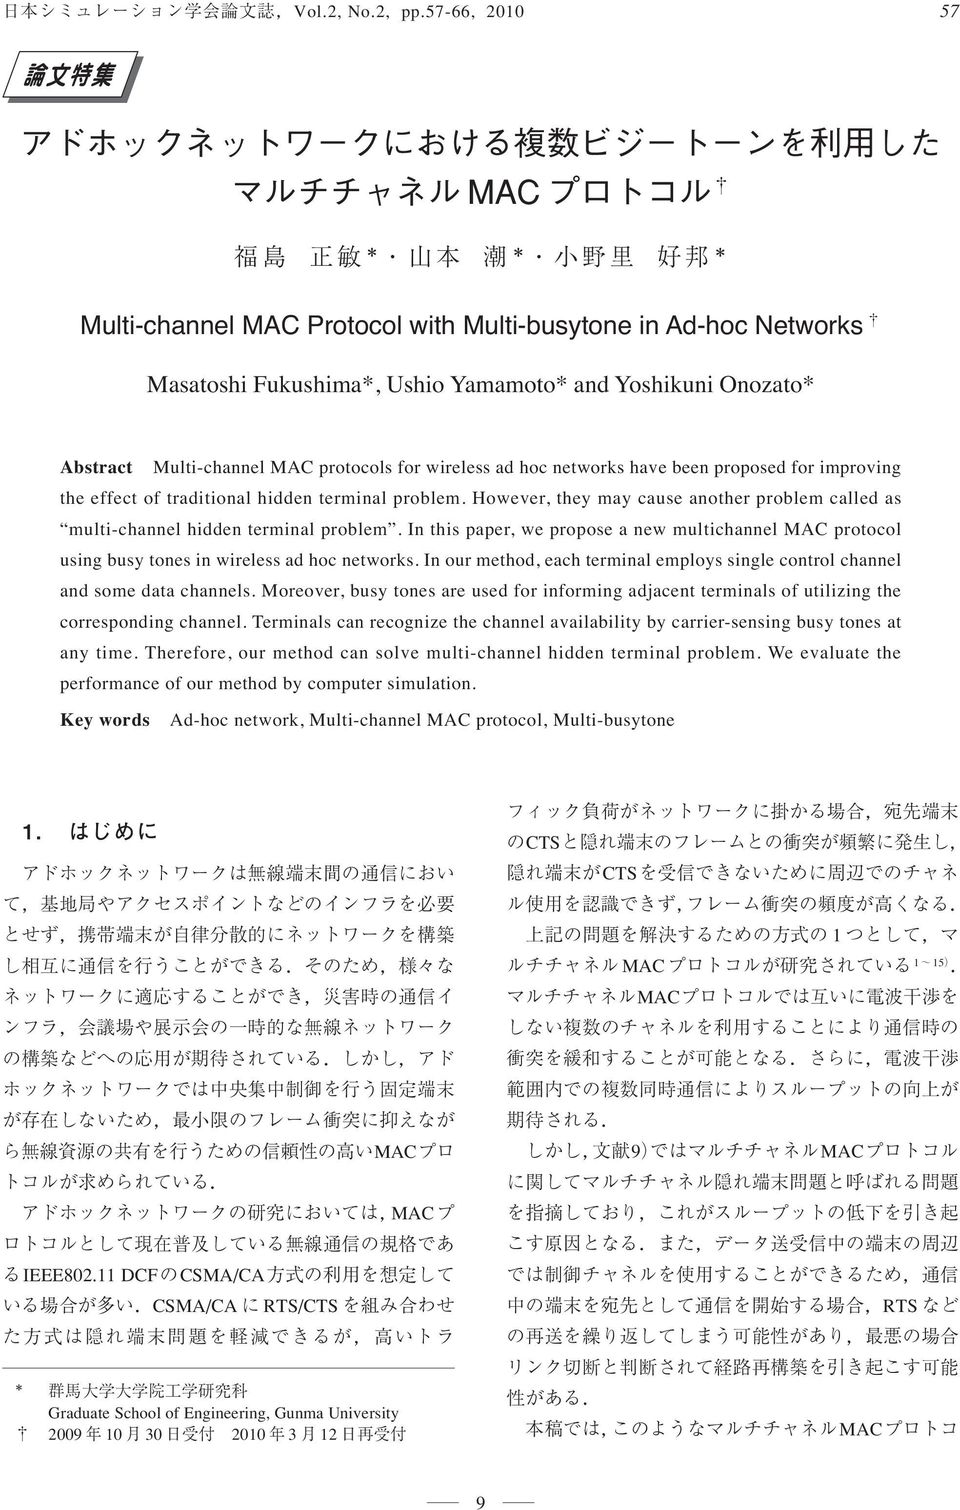 In this paper, we propose a new multichannel MAC protocol using busy tones in wireless ad hoc networks. In our method, each terminal employs single control channel and some data channels.